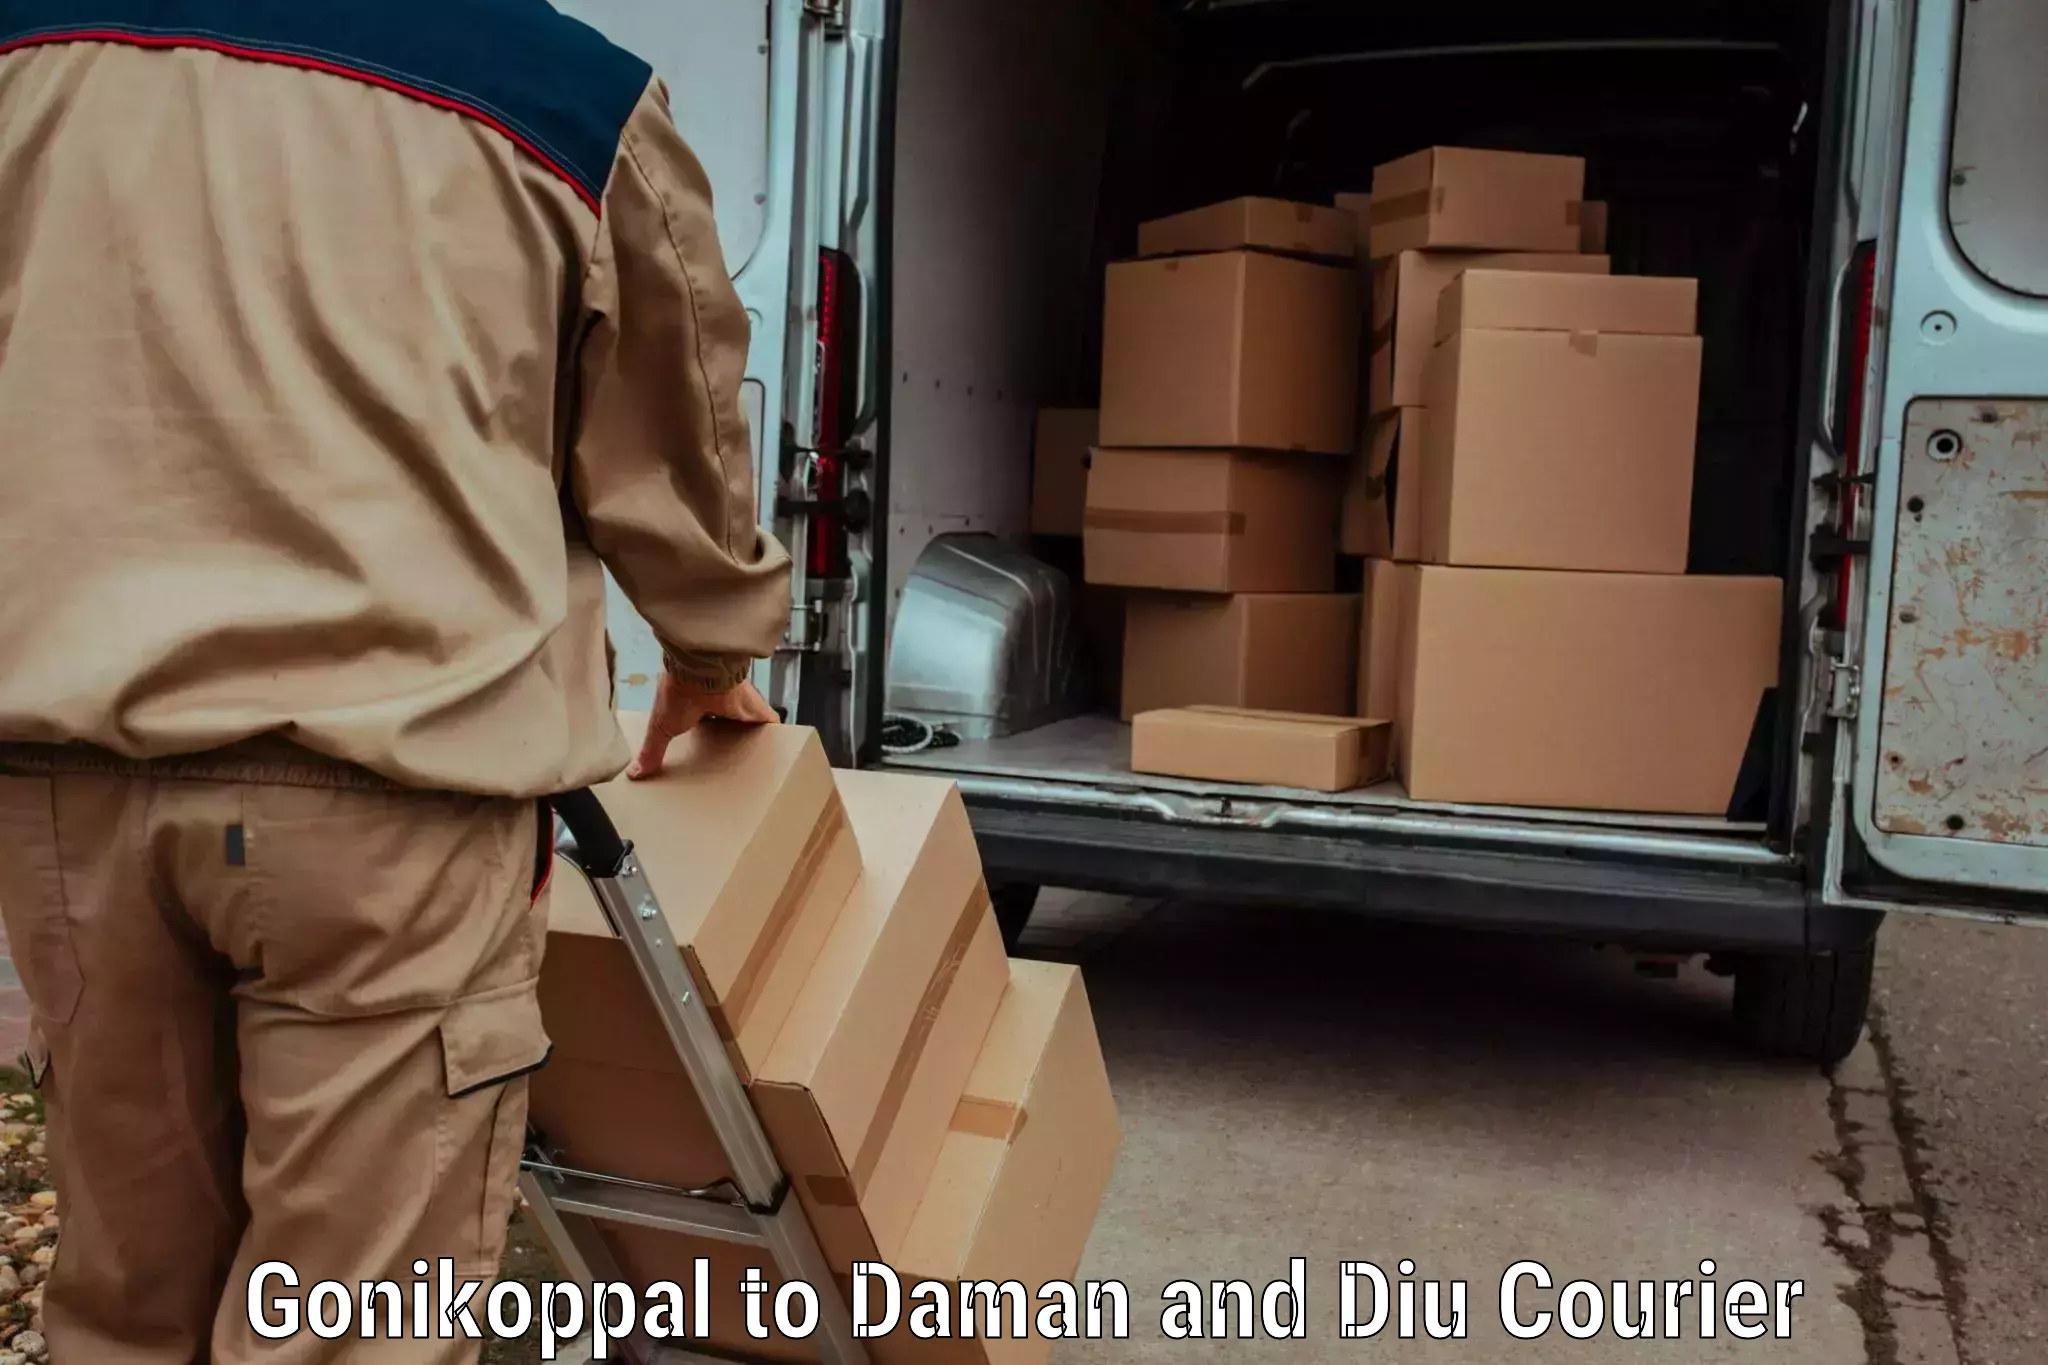 User-friendly delivery service Gonikoppal to Diu